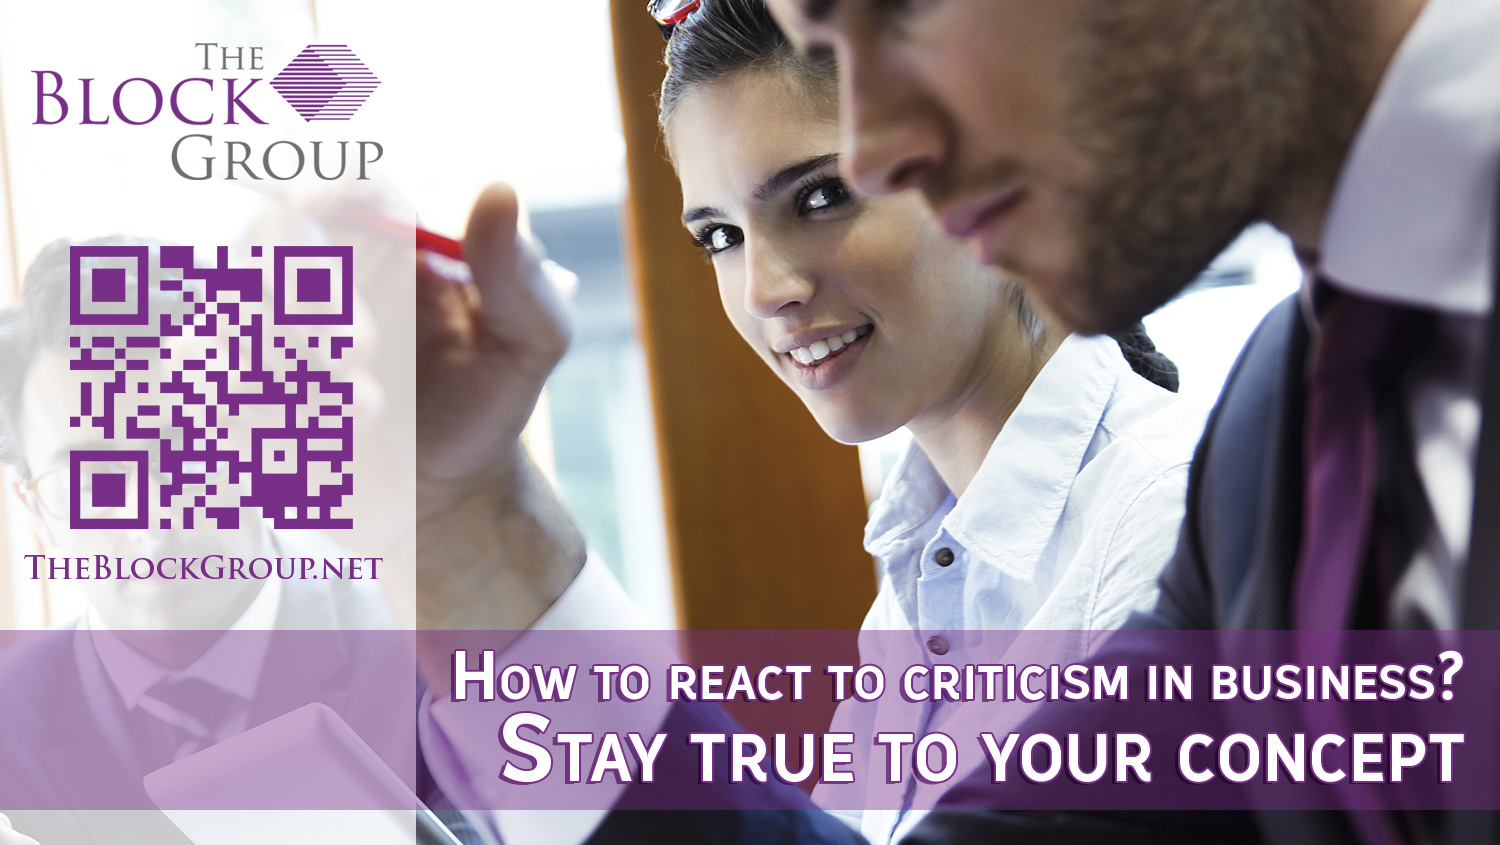 018-How-to-react-to-criticism-in-business